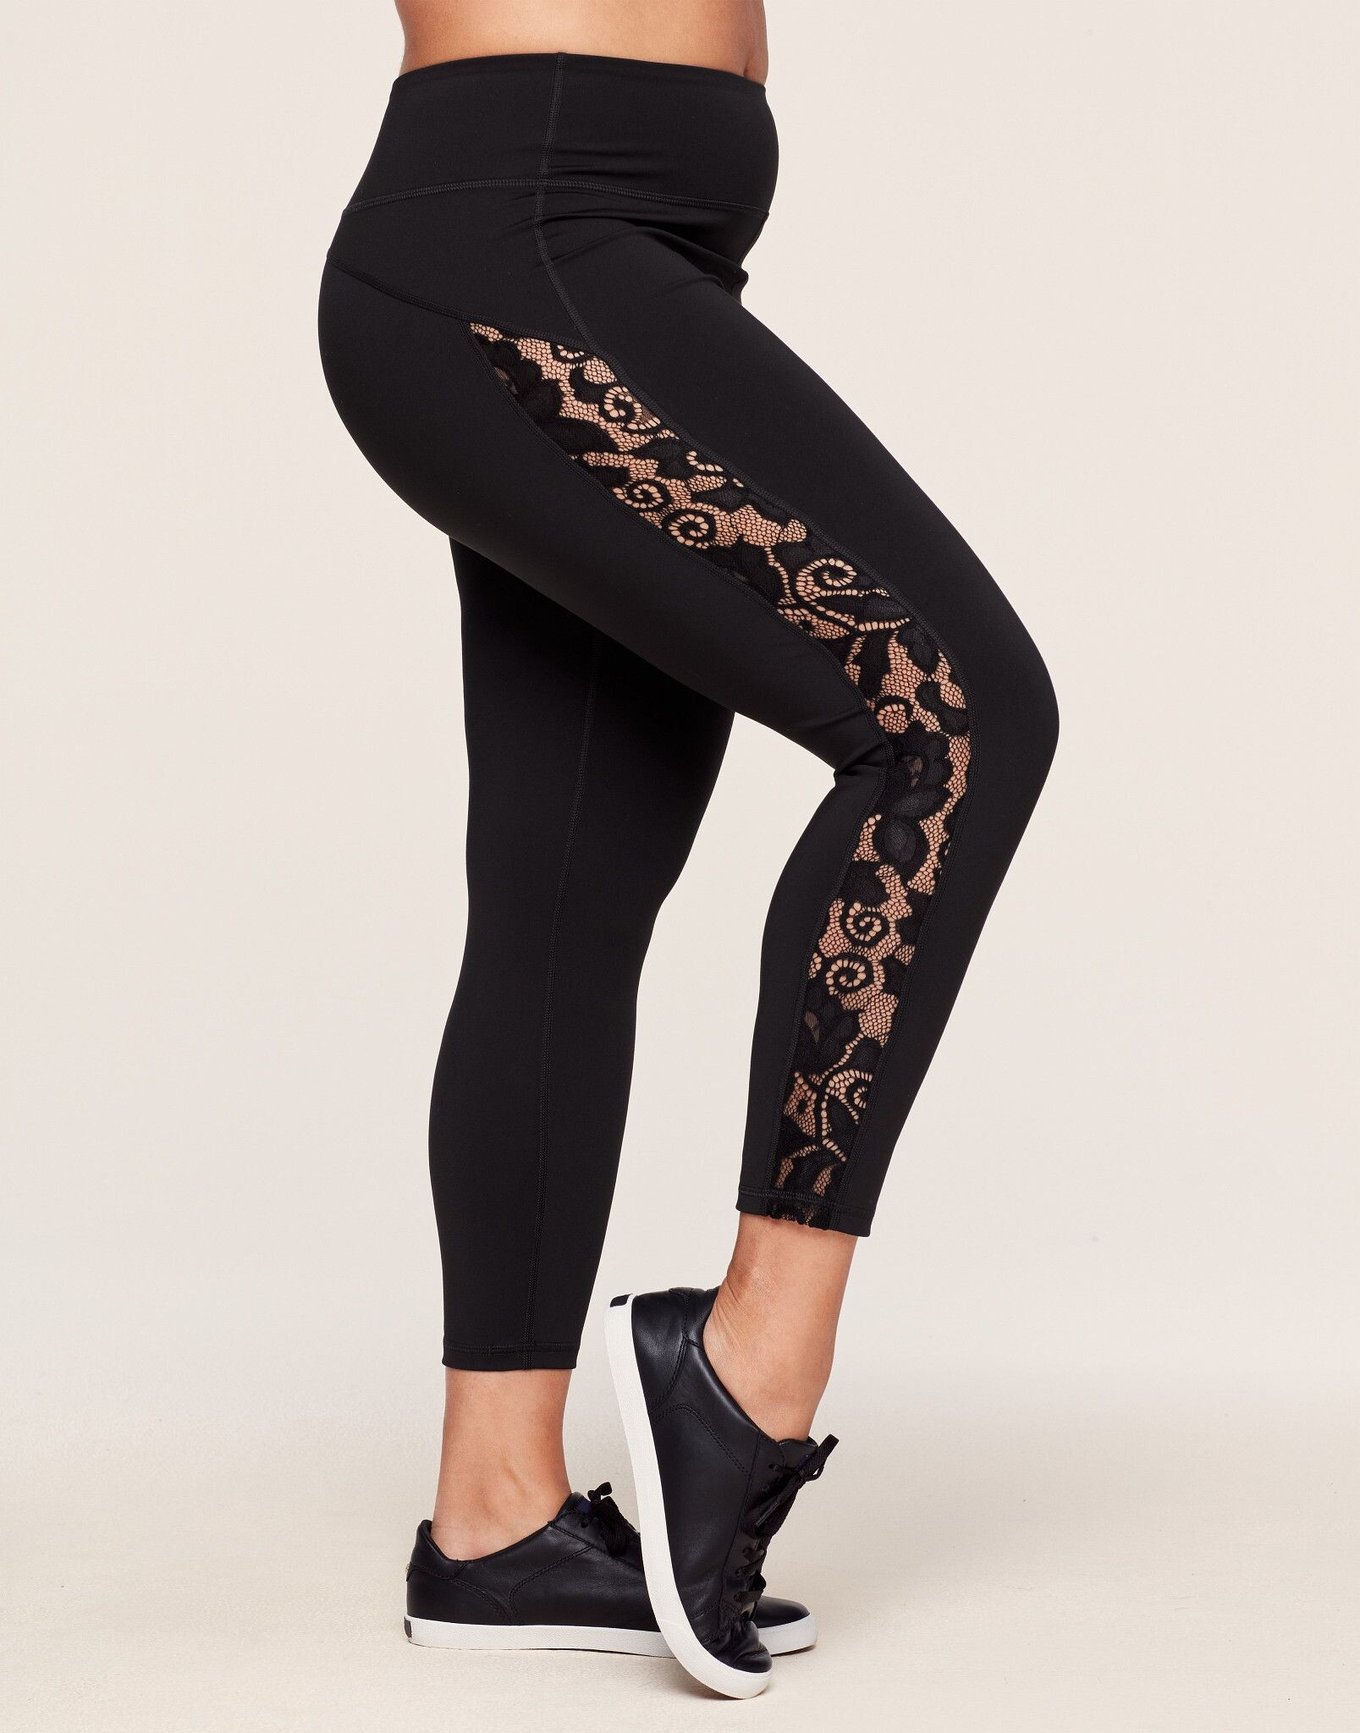 Blue Life Fit Cheeky Lace Up Leggings